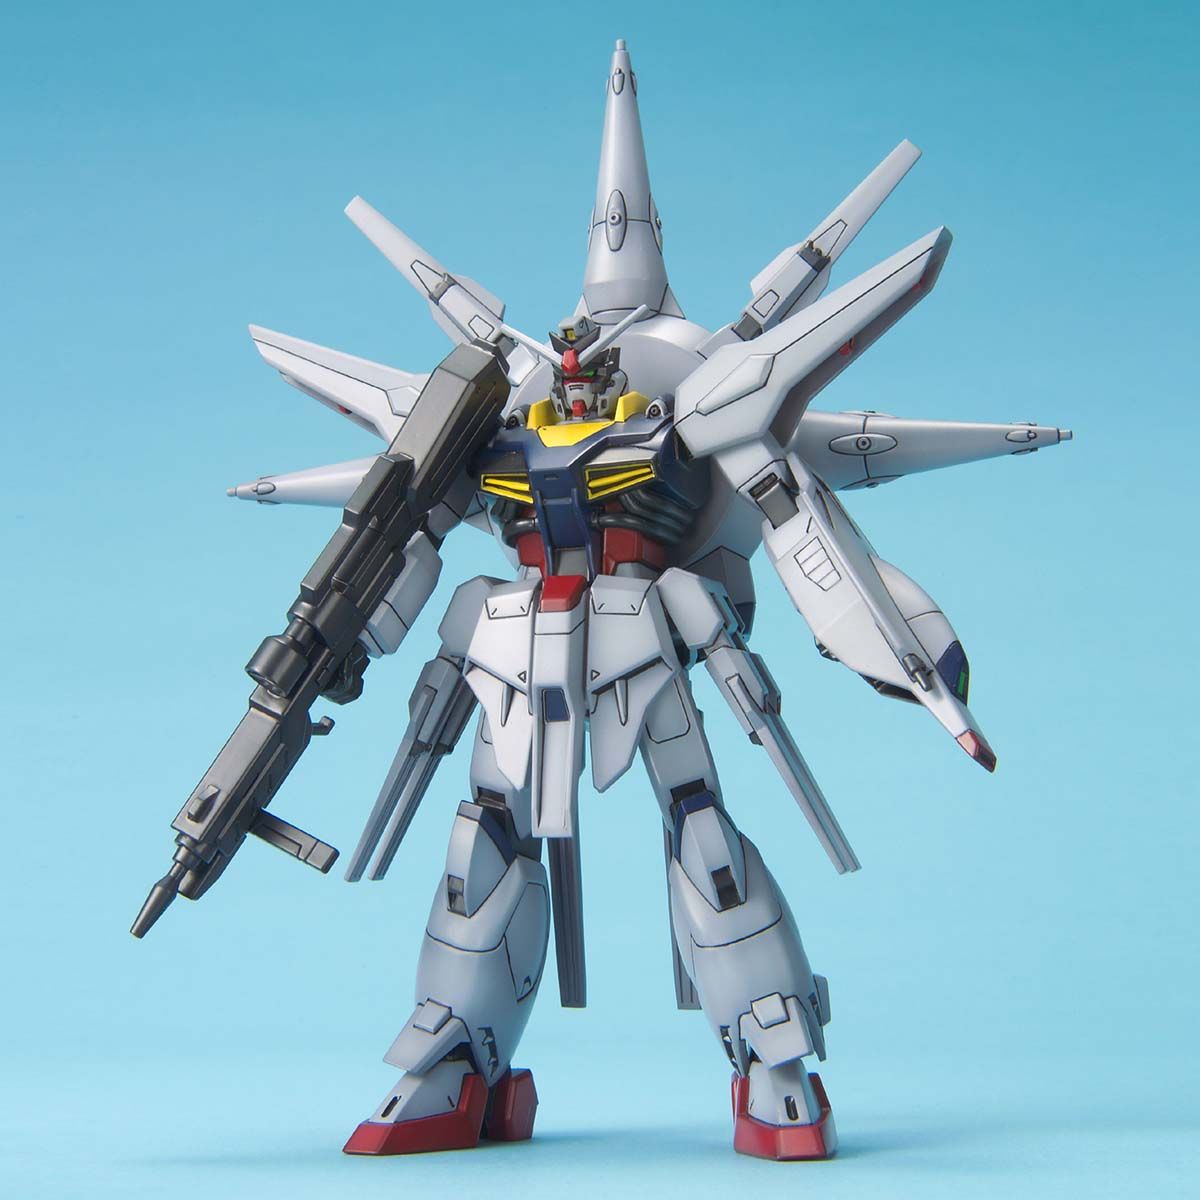 Mobile Suit Gundam Seed 1/144 Scale Model No.19 ZGMF-X13A Providence Gundam